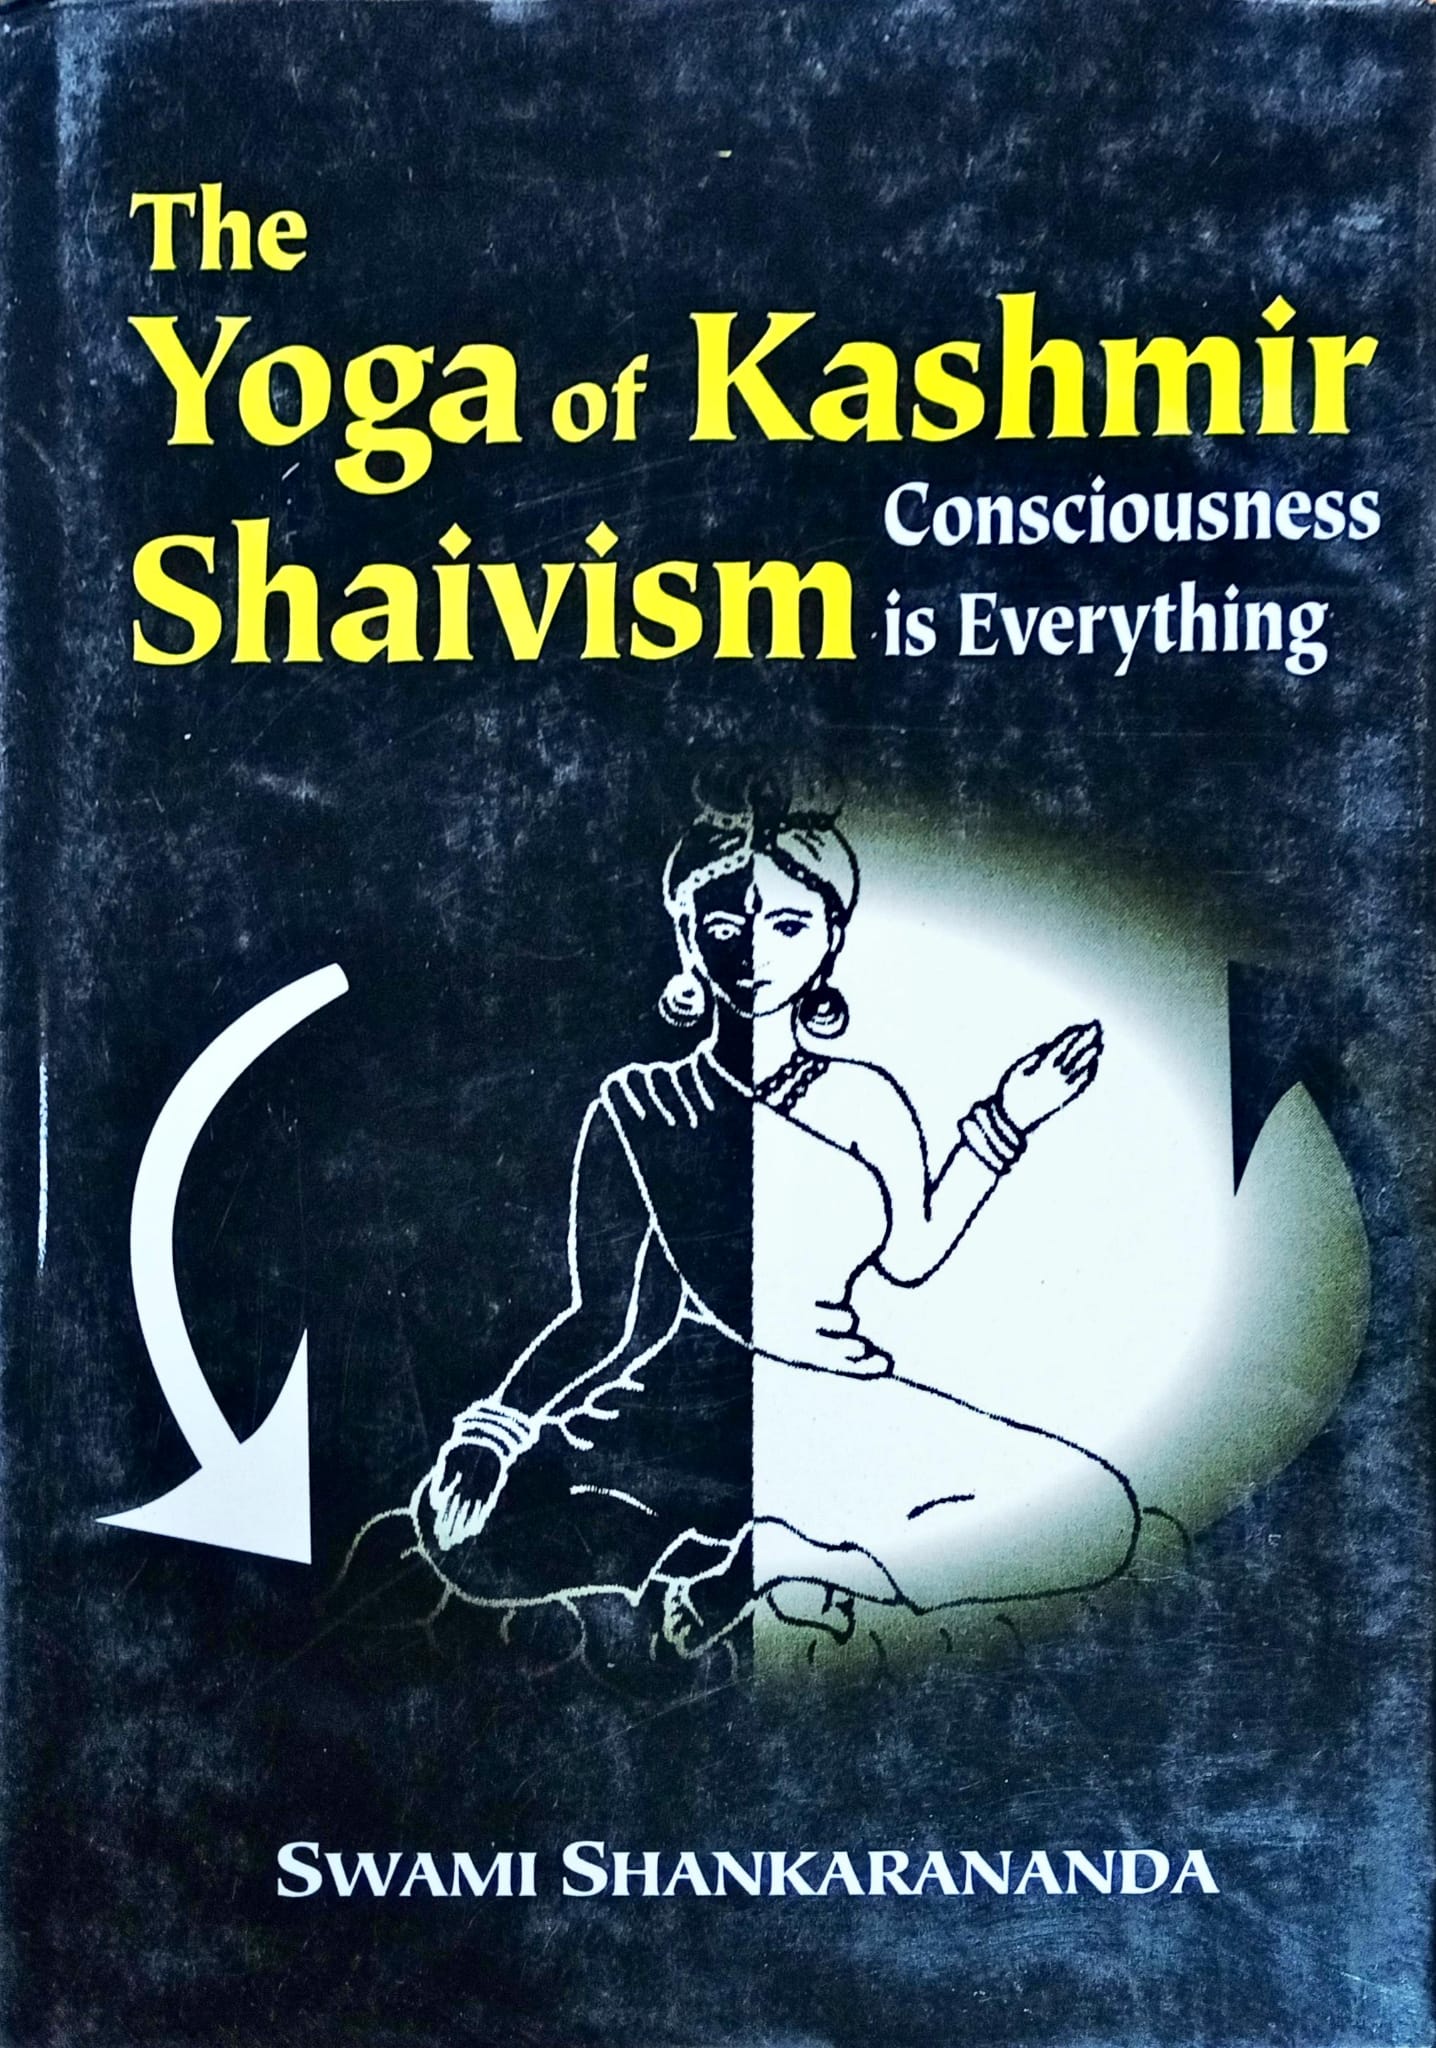 The Yoga of Kashmir Shaivism Consciousness is Everything